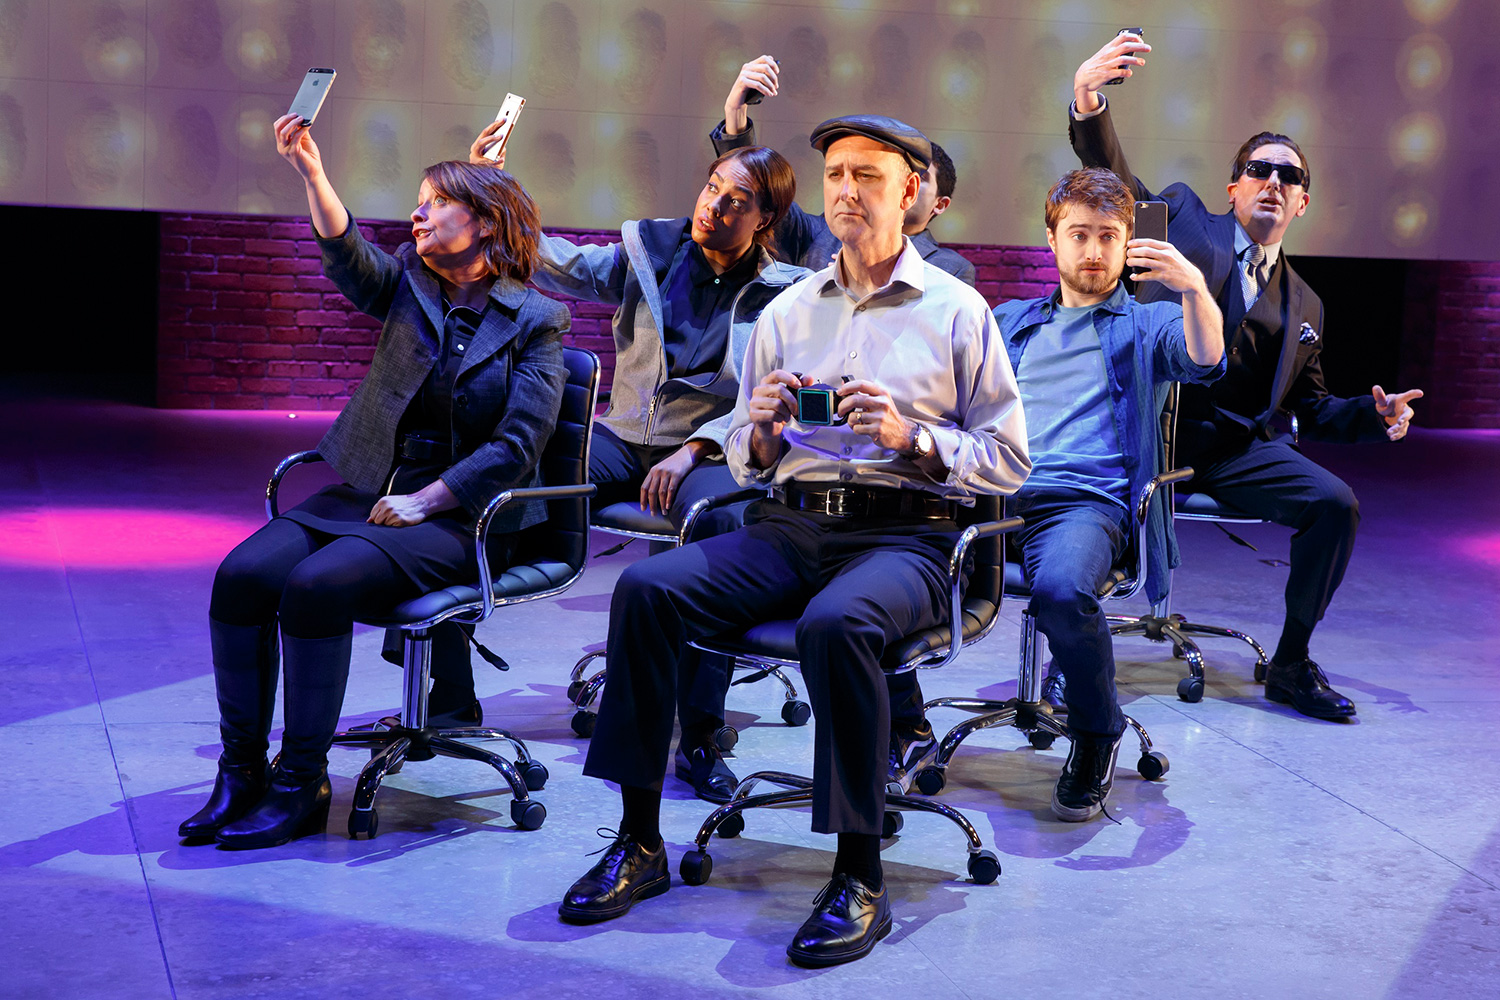 Cast on stage taking selfies during a performance. From left to right: Rachel Dratch, De’Adre Aziza, Michael Countrymen, Daniel Radcliffe and Reg Rogers. Raffi Barsoumian